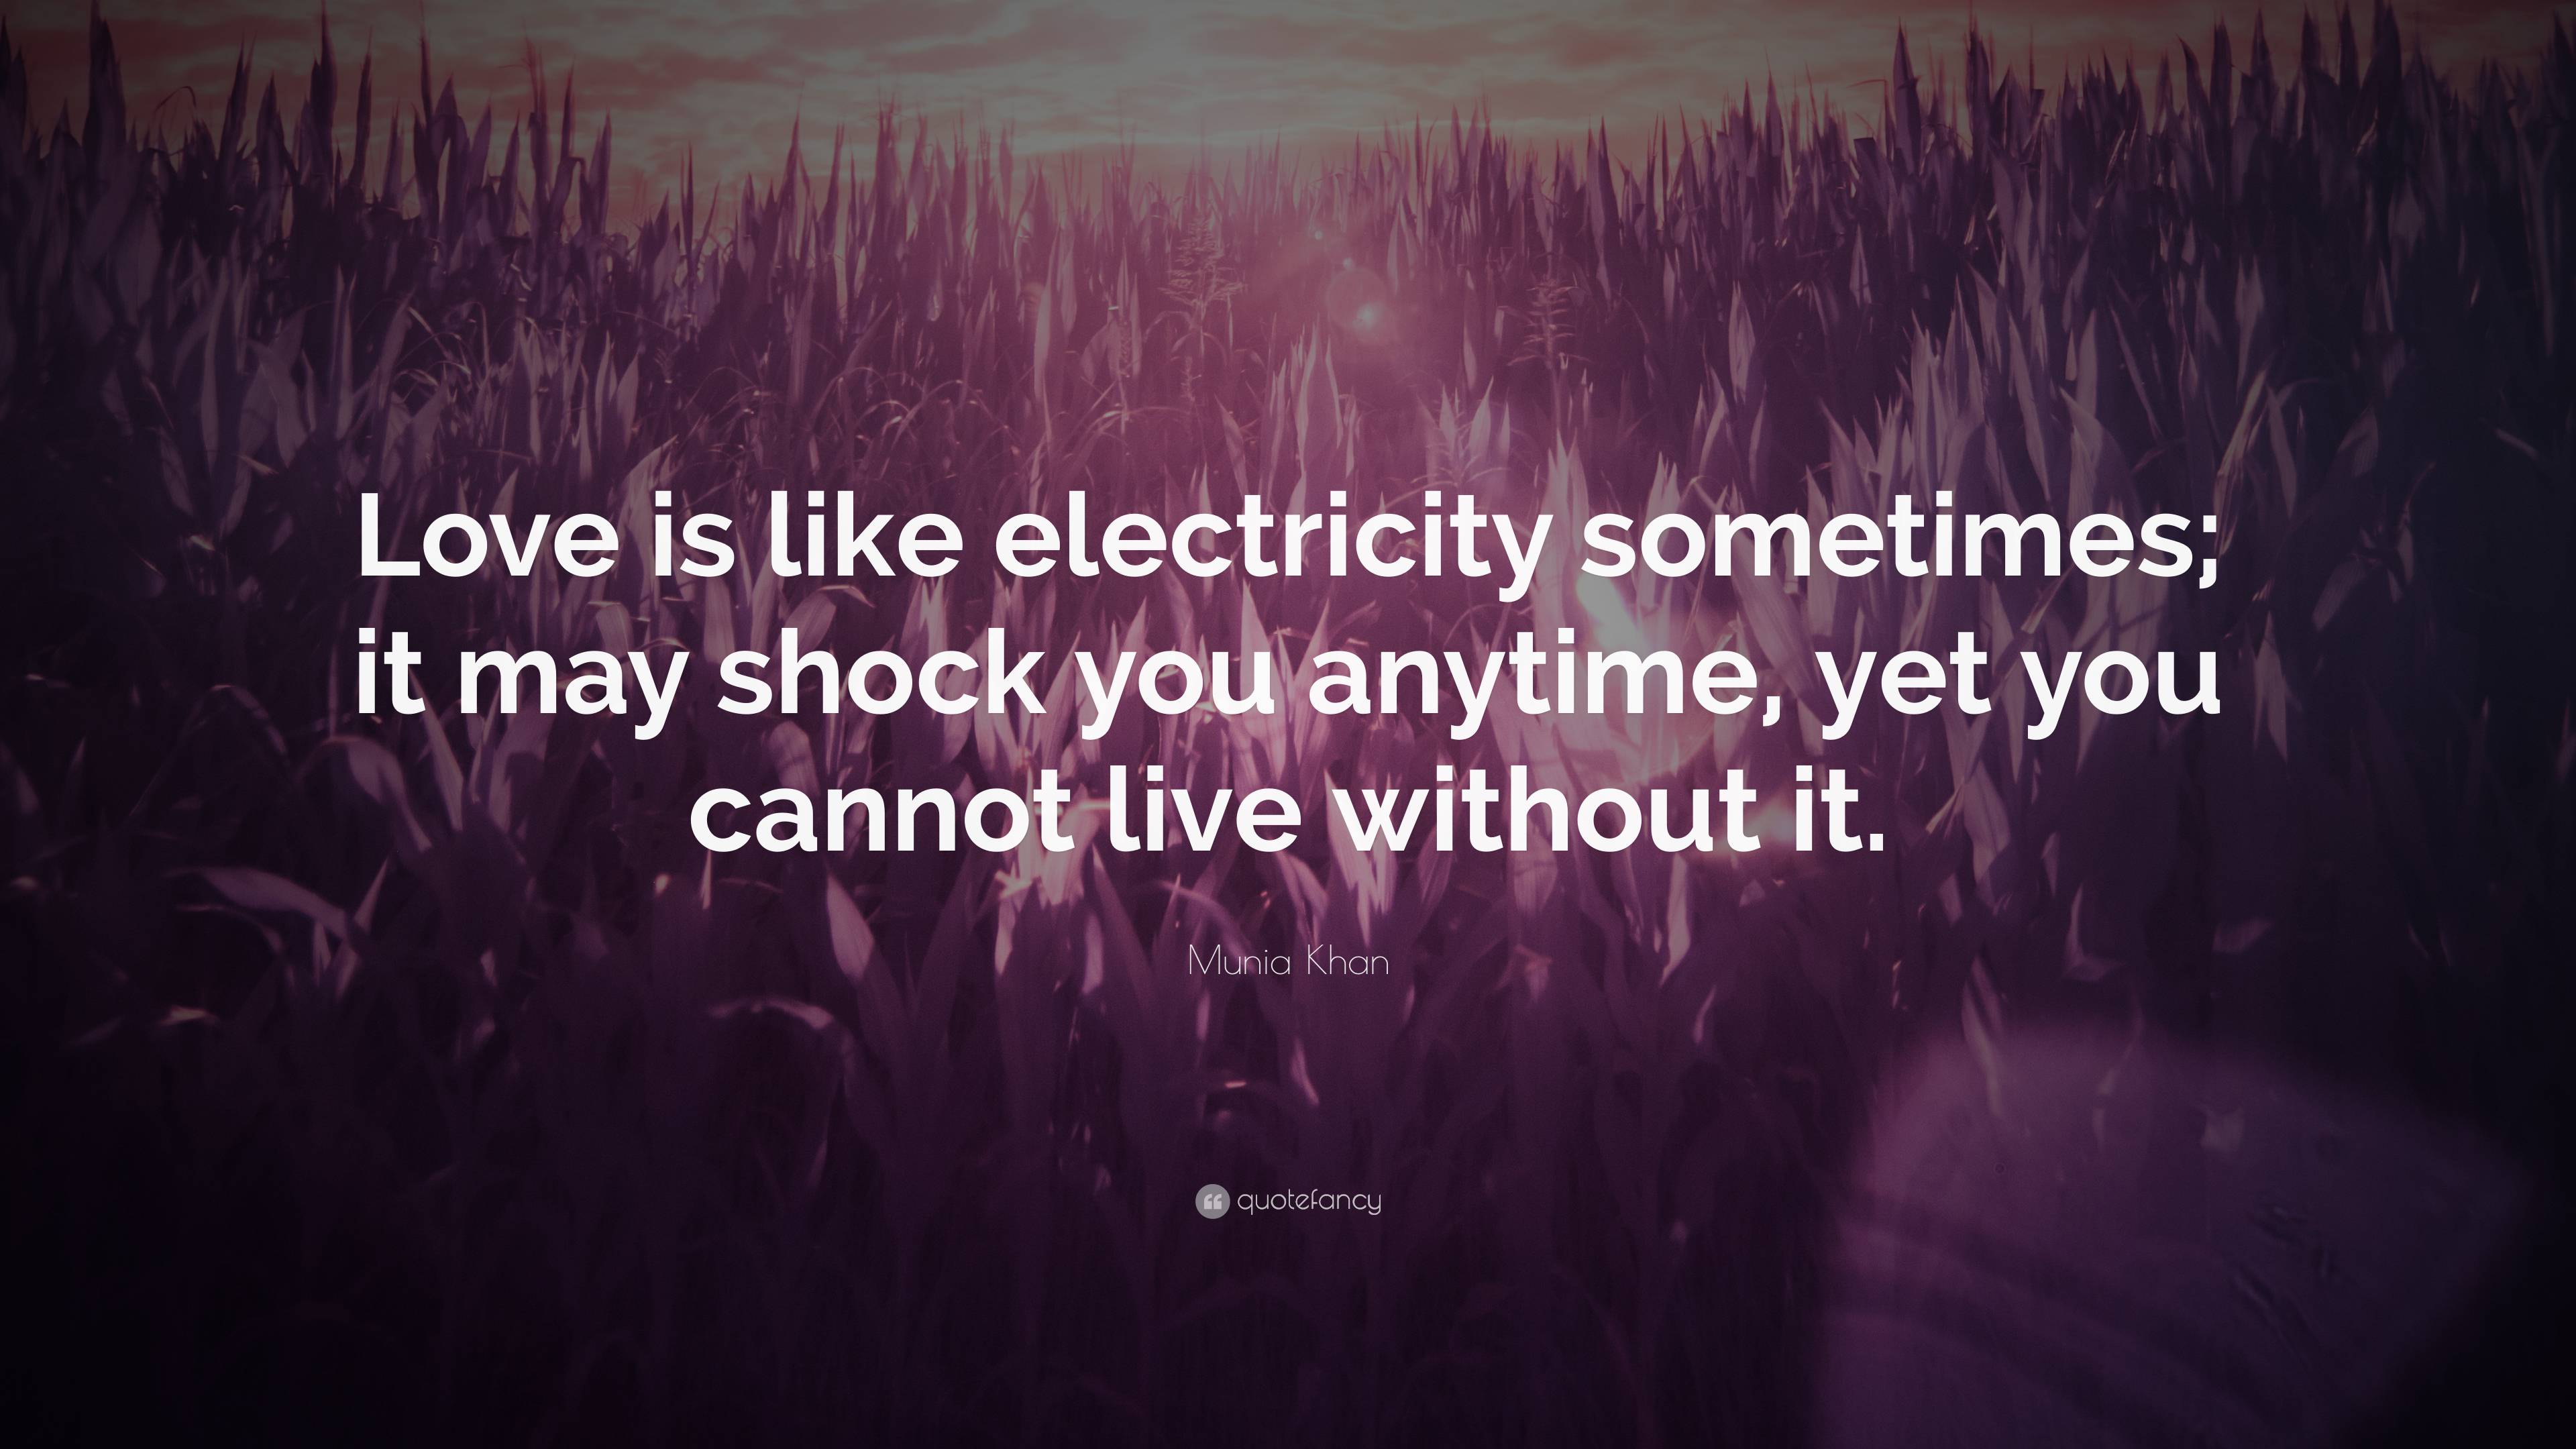 https://quotefancy.com/media/wallpaper/3840x2160/7316228-Munia-Khan-Quote-Love-is-like-electricity-sometimes-it-may-shock.jpg